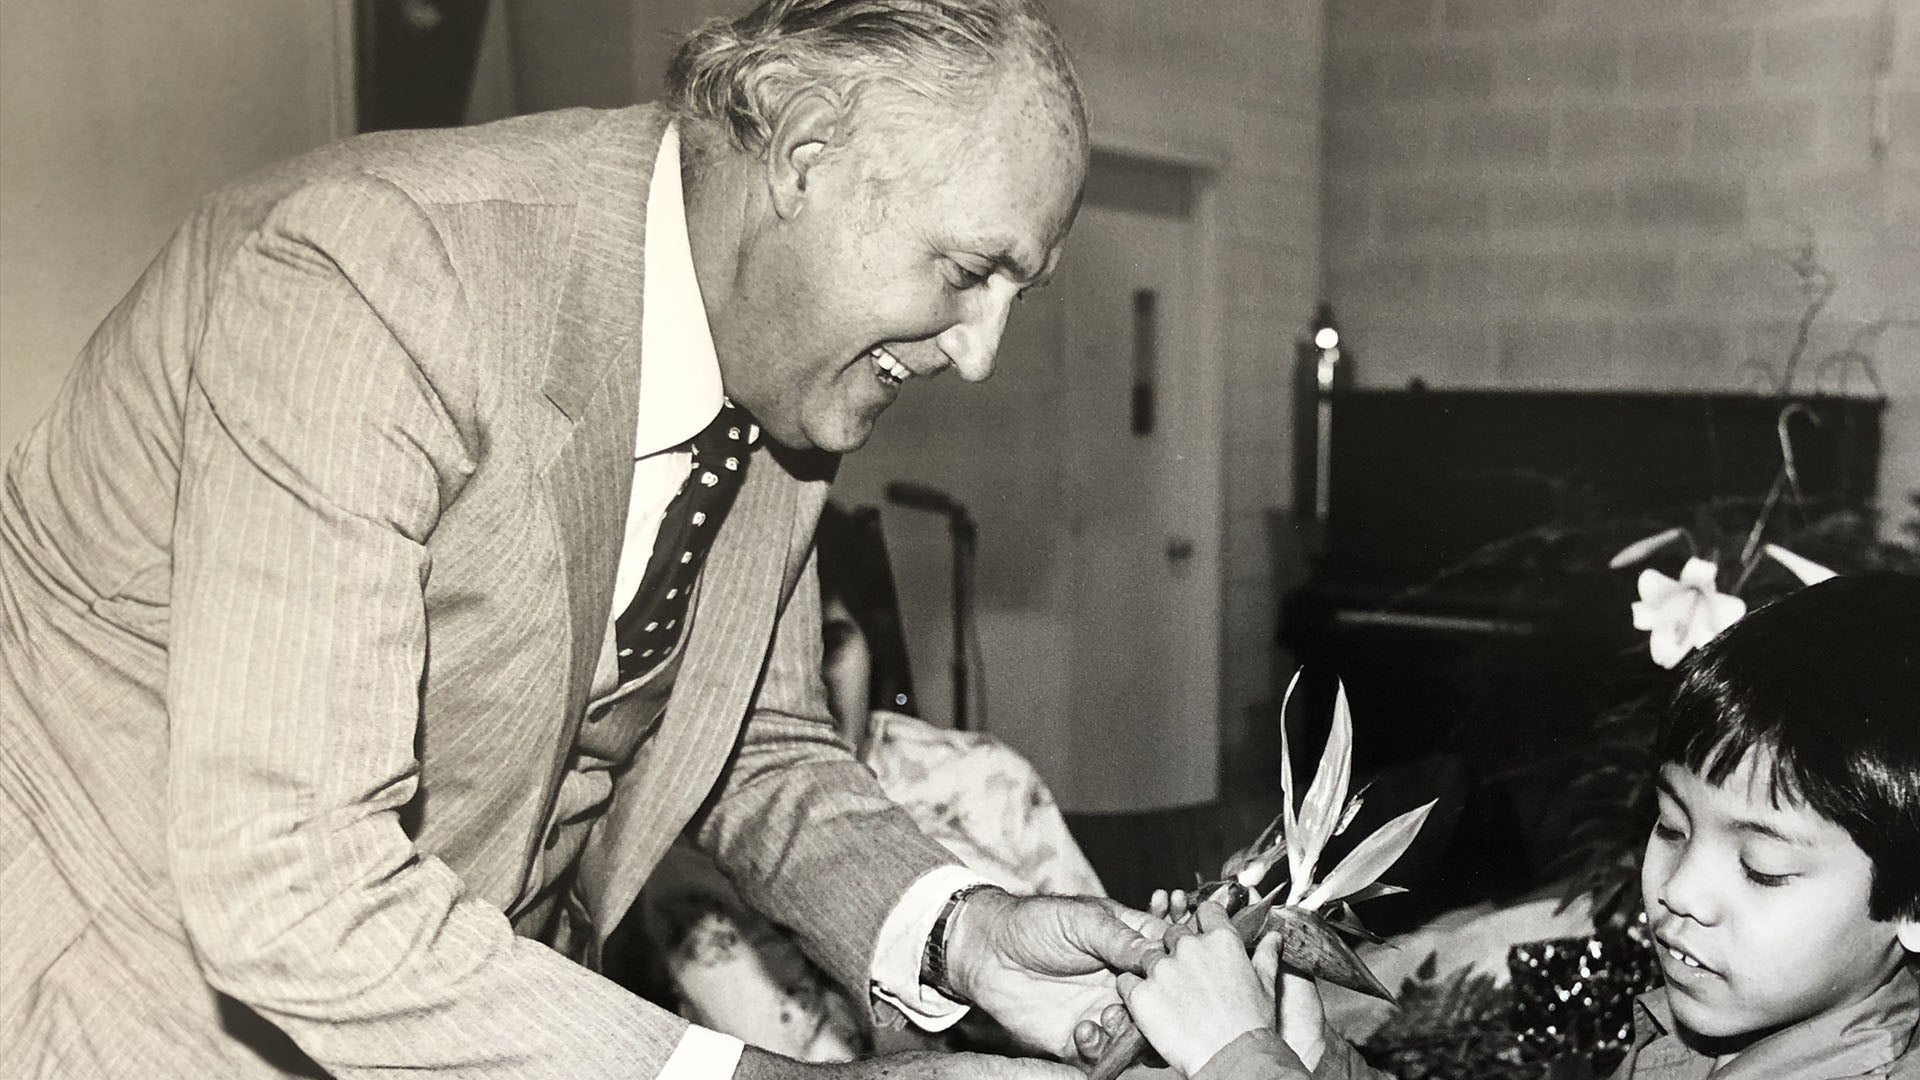 Black and white photo, of smiling man, in suit ,giving flower to a child.